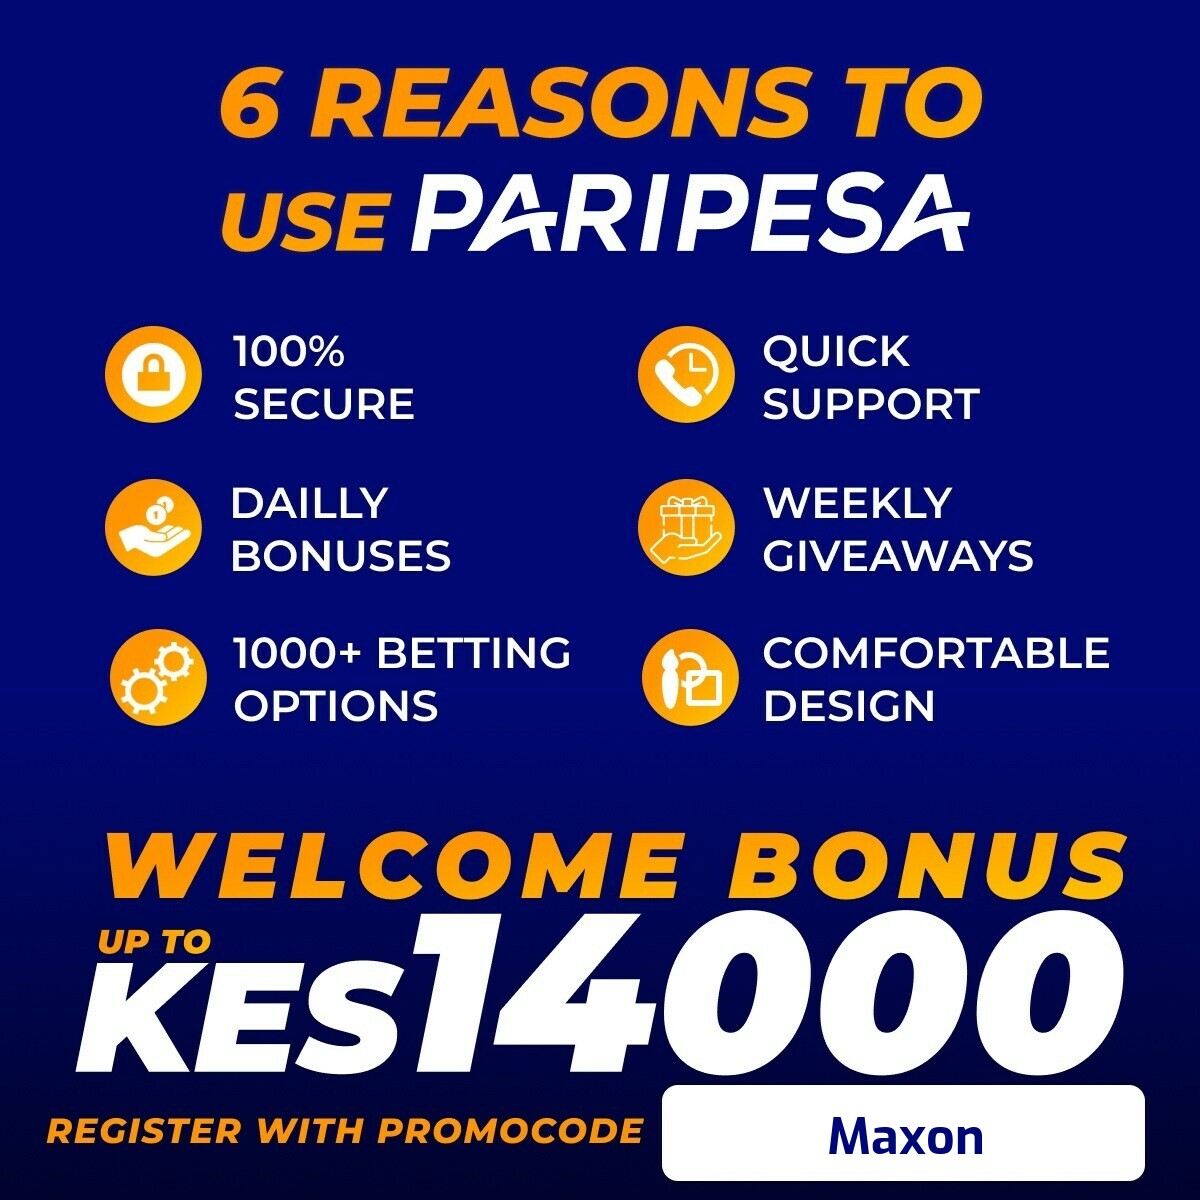 Paripesa gives you the best offers💯

📌TAX-FREE
 📌Boosted odds
📌100% welcome bonus

Join NOW & start winning🫵
Register :bit.ly/3QIlmmG
Promocode :MAXON